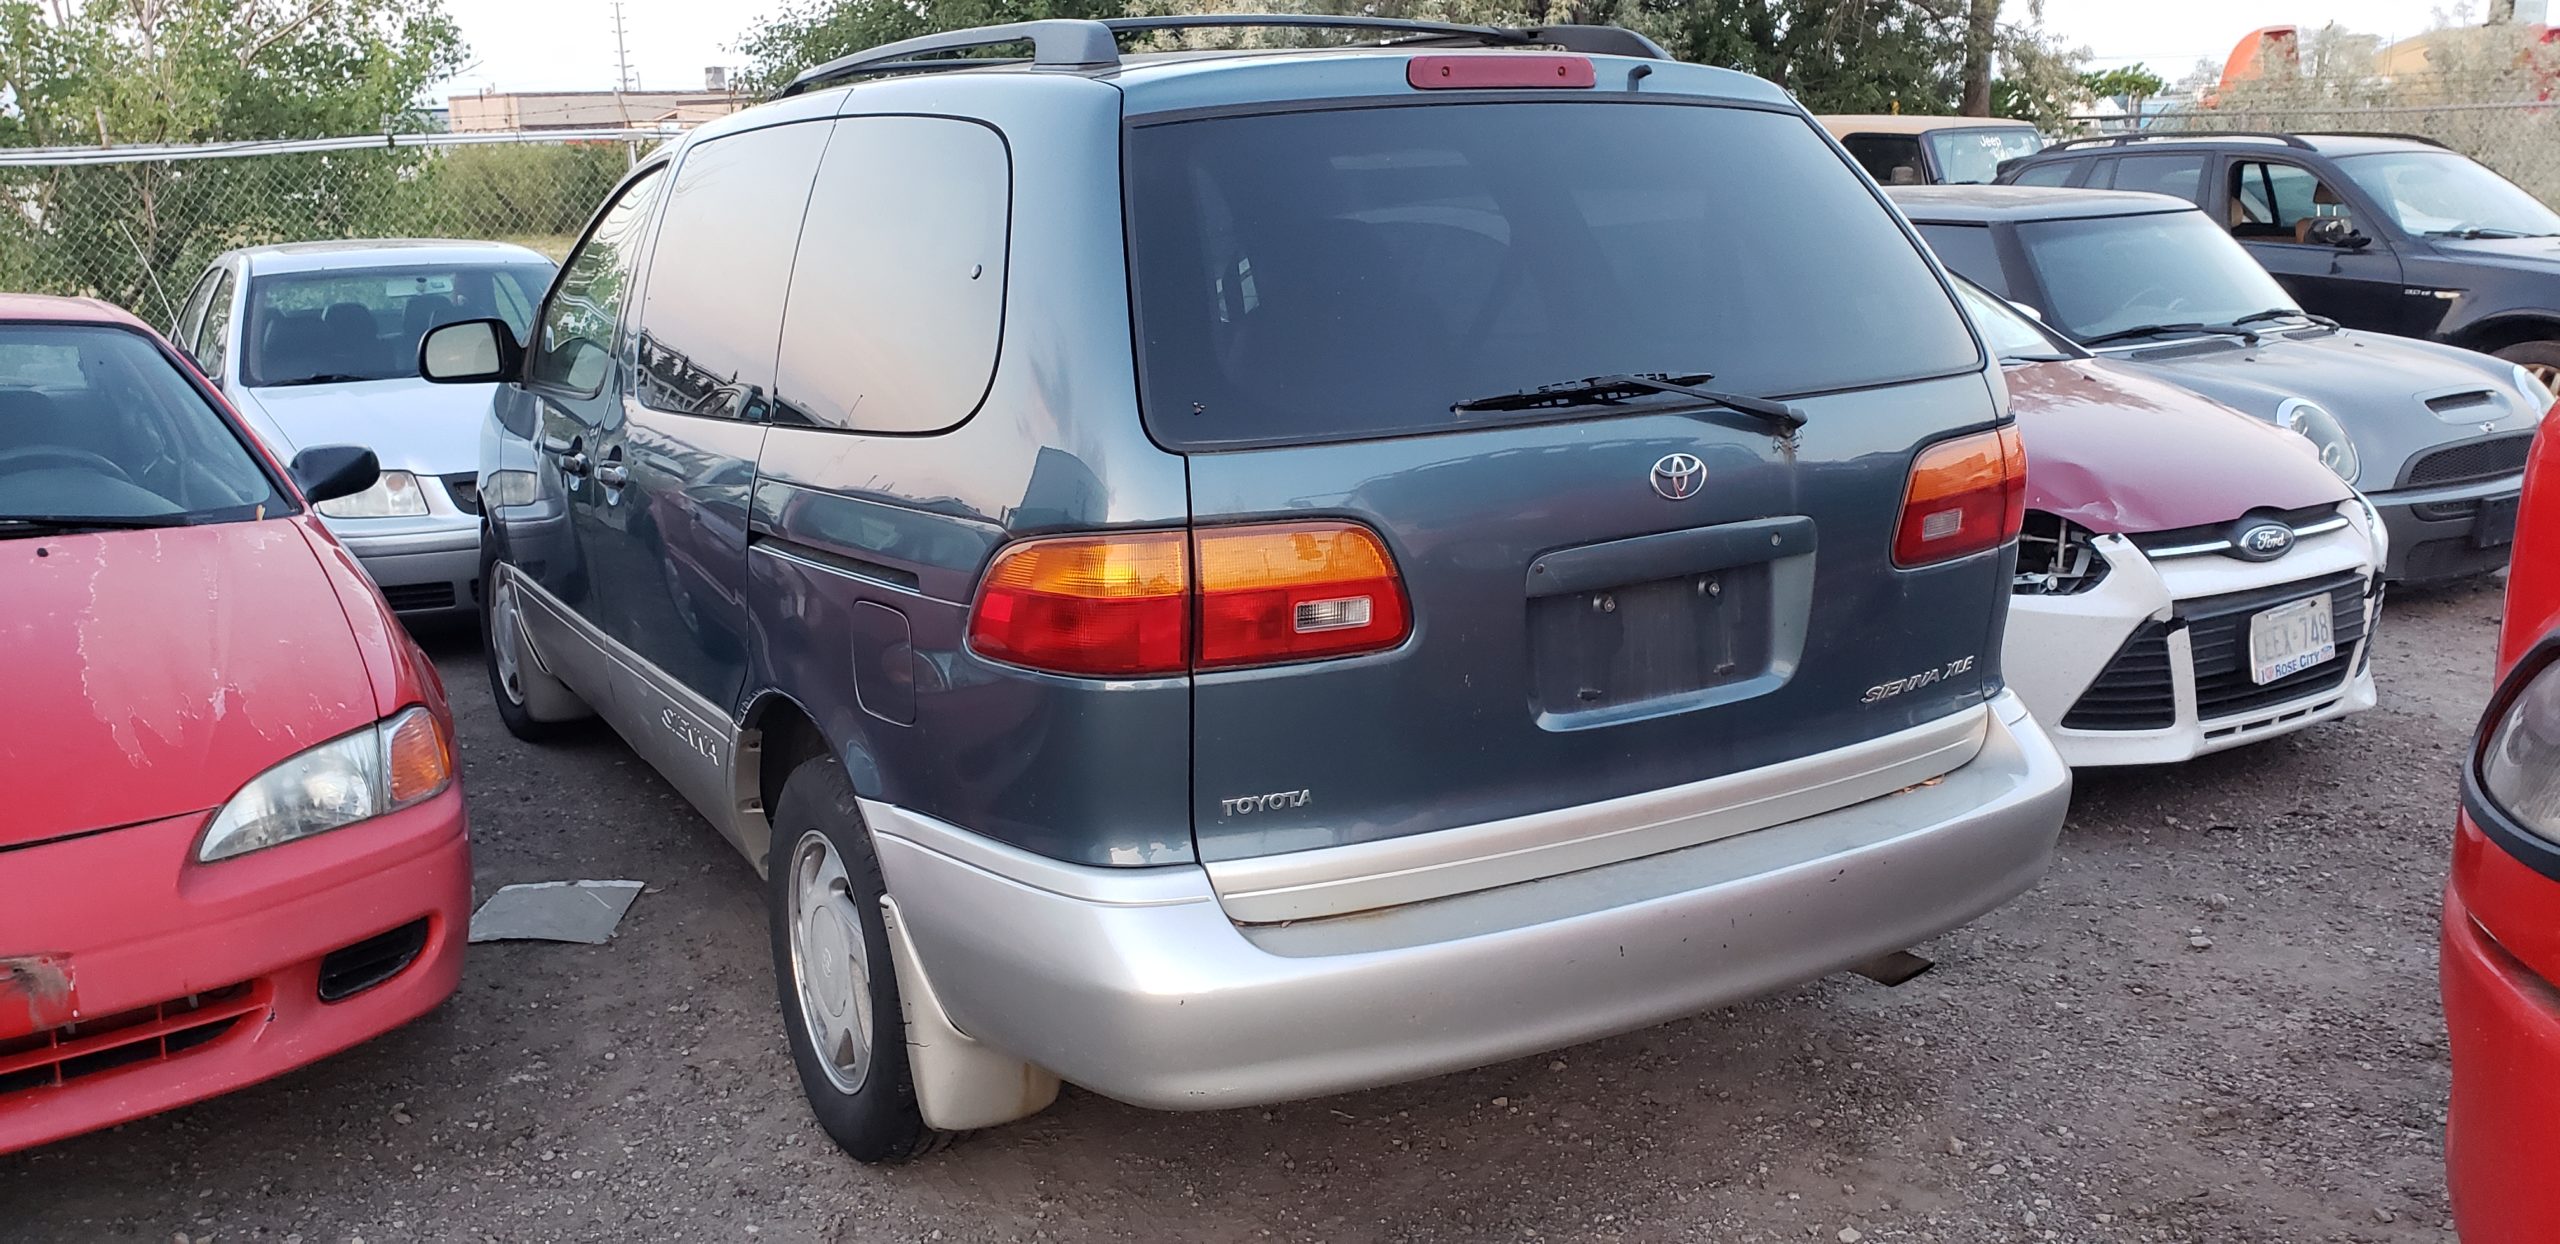 Toyota Sienna - Cash For Junk Cars in Brampton and the GTA